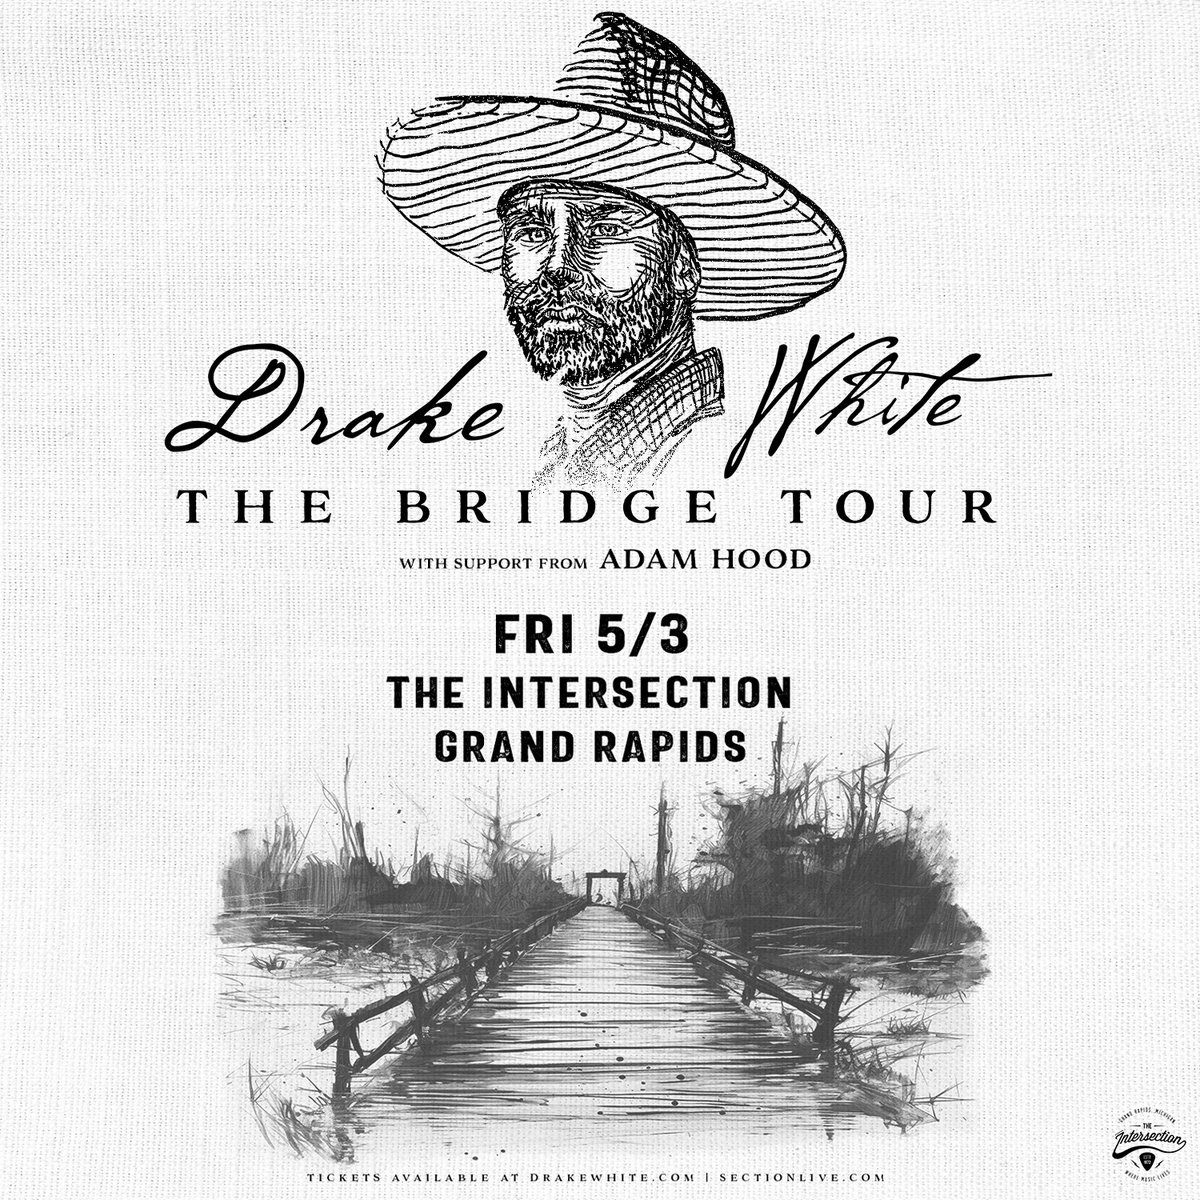 Tonight at The Intersection - @B93dotcom presents @DrakeWhite The Bridge Tour with @adamhoodmusic All Ages | Doors 6:30pm | 🎫 bit.ly/DrakeWhiteGR24